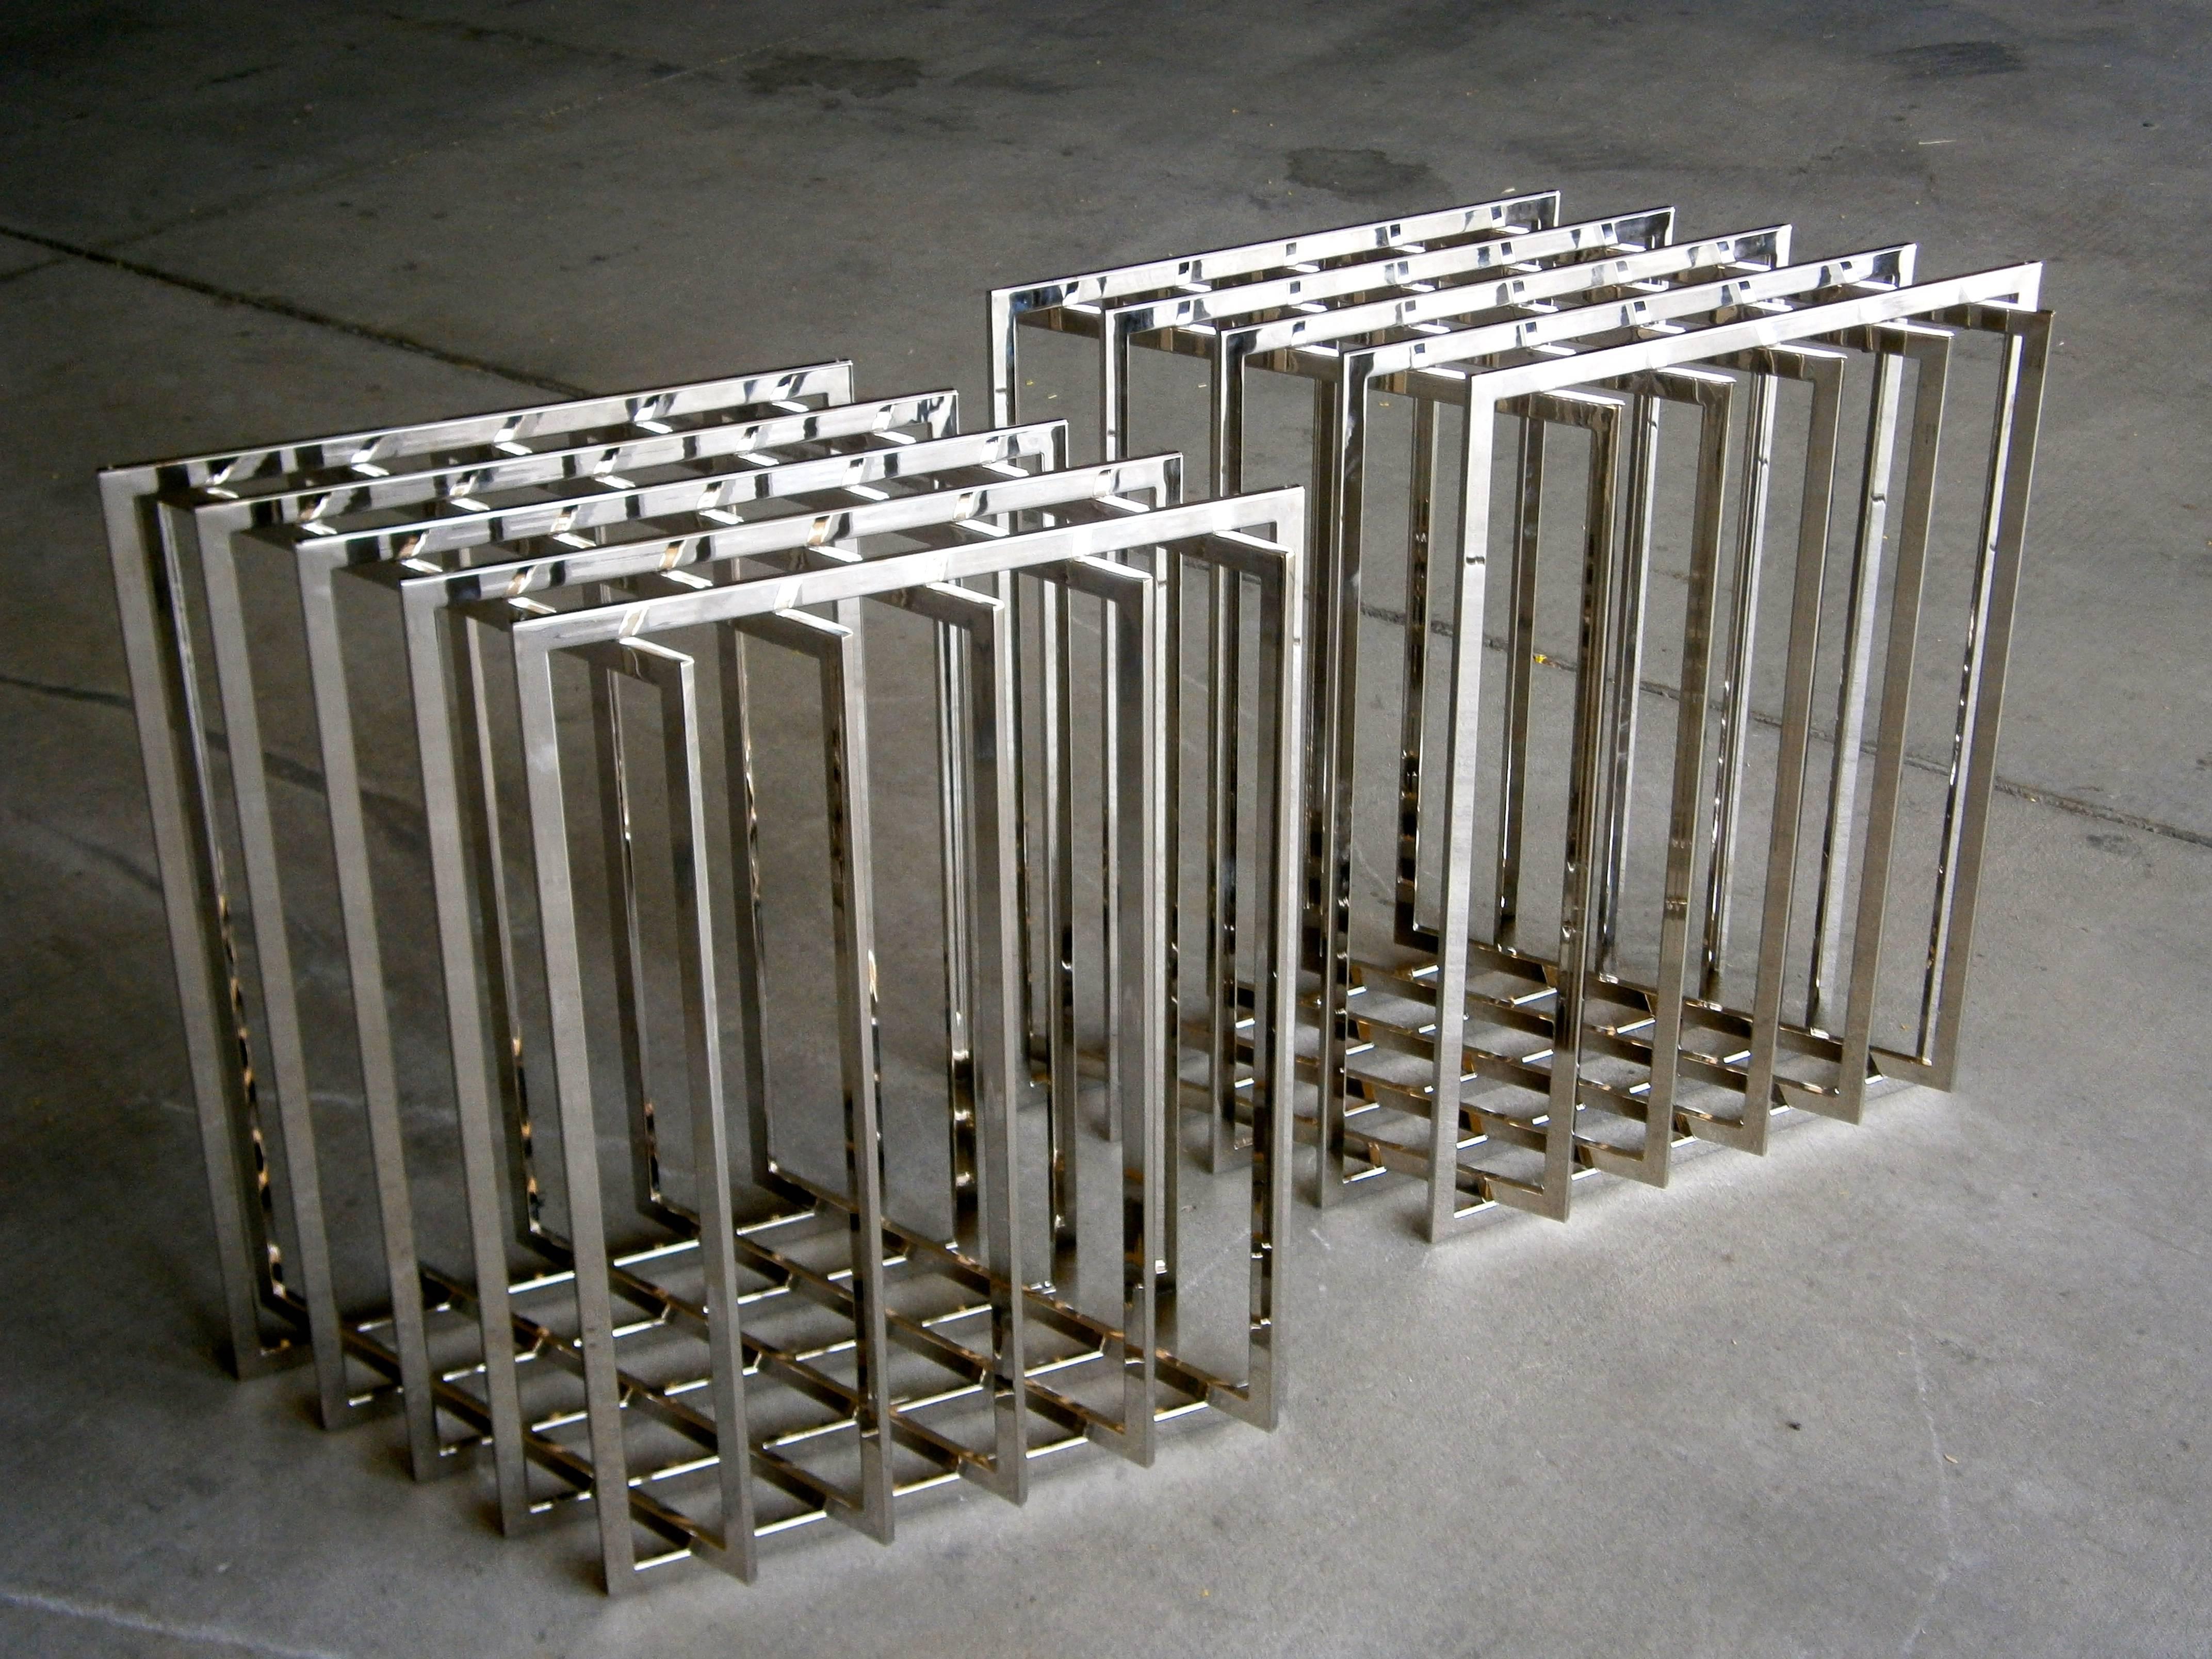 Late 20th Century Pair of Nickel Plated Cage-Form Table Bases by Pierre Cardin  C. 1970s